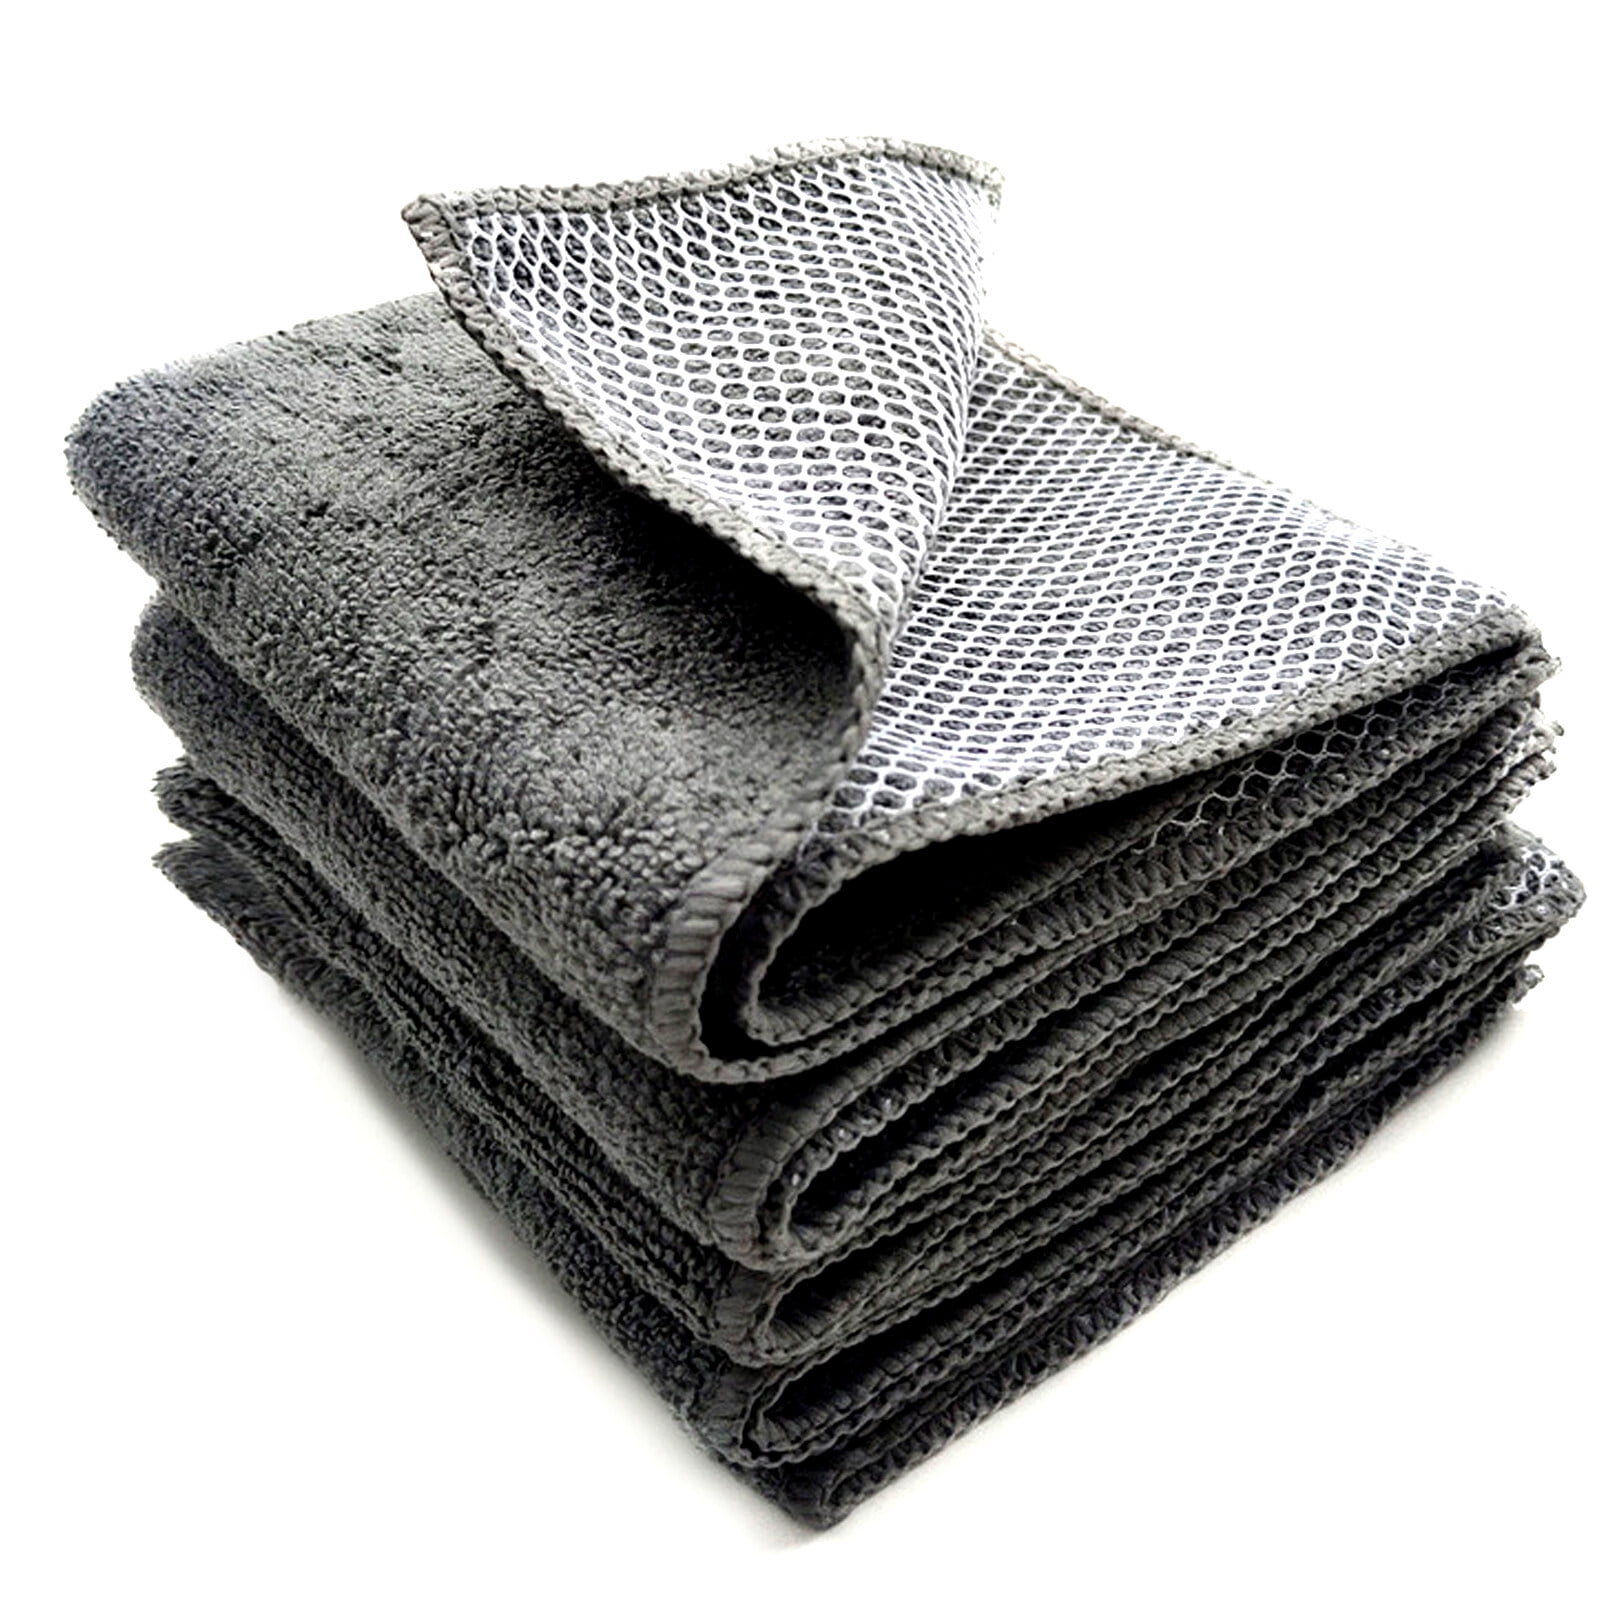 Kitchen Dish Cloths, Tea Towels Dish Scrubbing, Microfiber Cleaning Cloths  Dish Rags, 4 Pack, 12 x 12 Inches,Gray 